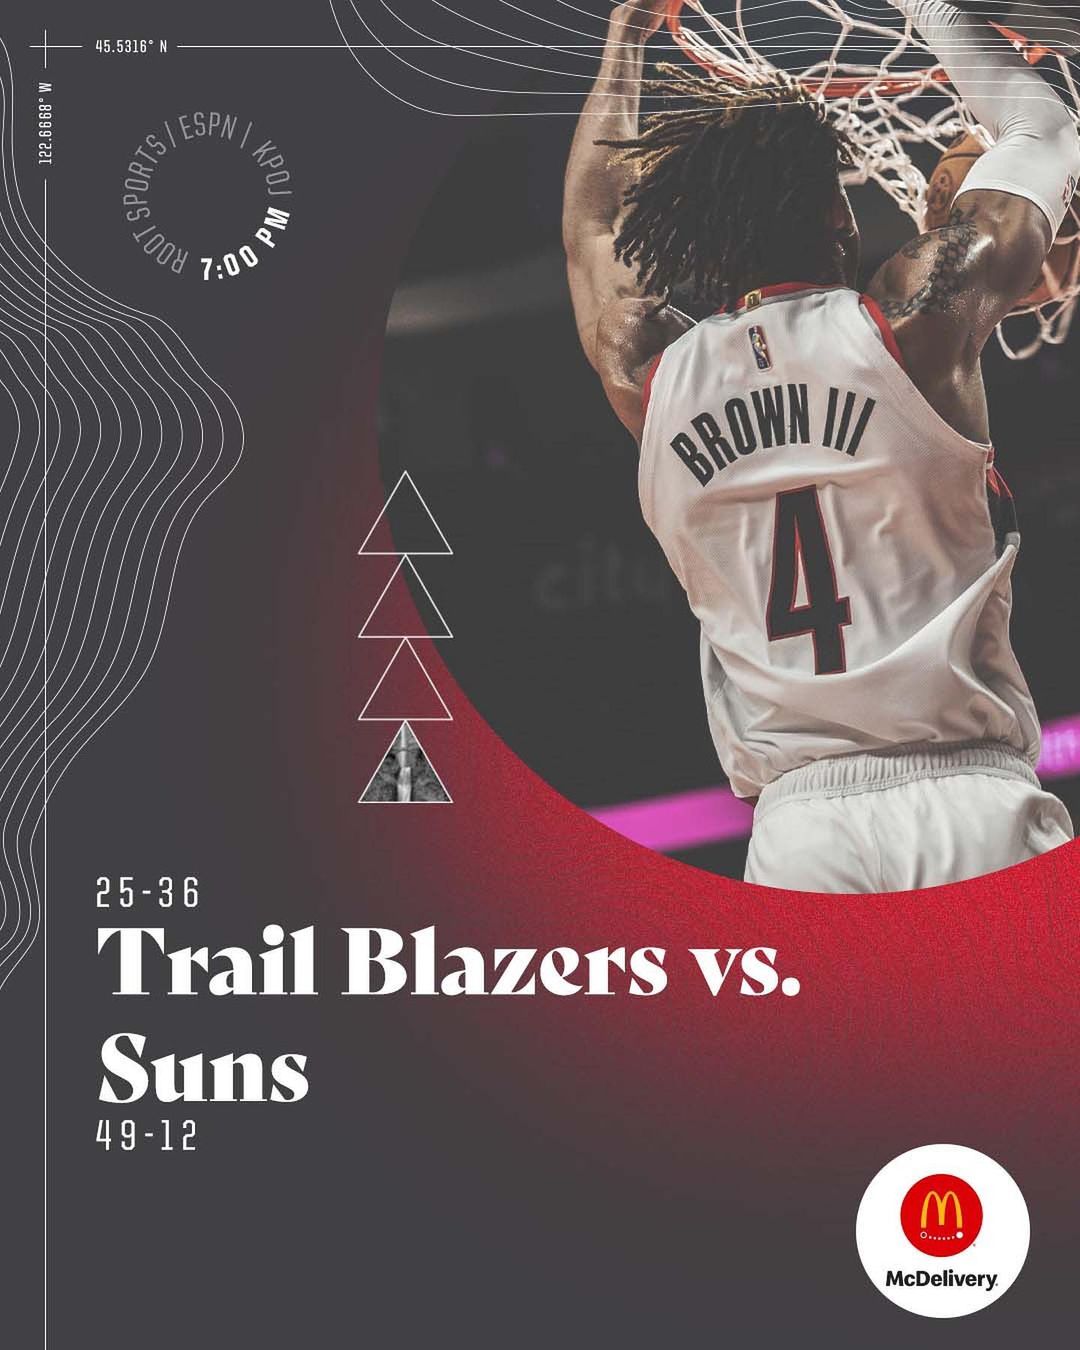 Hello from The Valley.  #RipCity    vs @suns 
 @footprintcntr 
 7:00PM
 @roots...